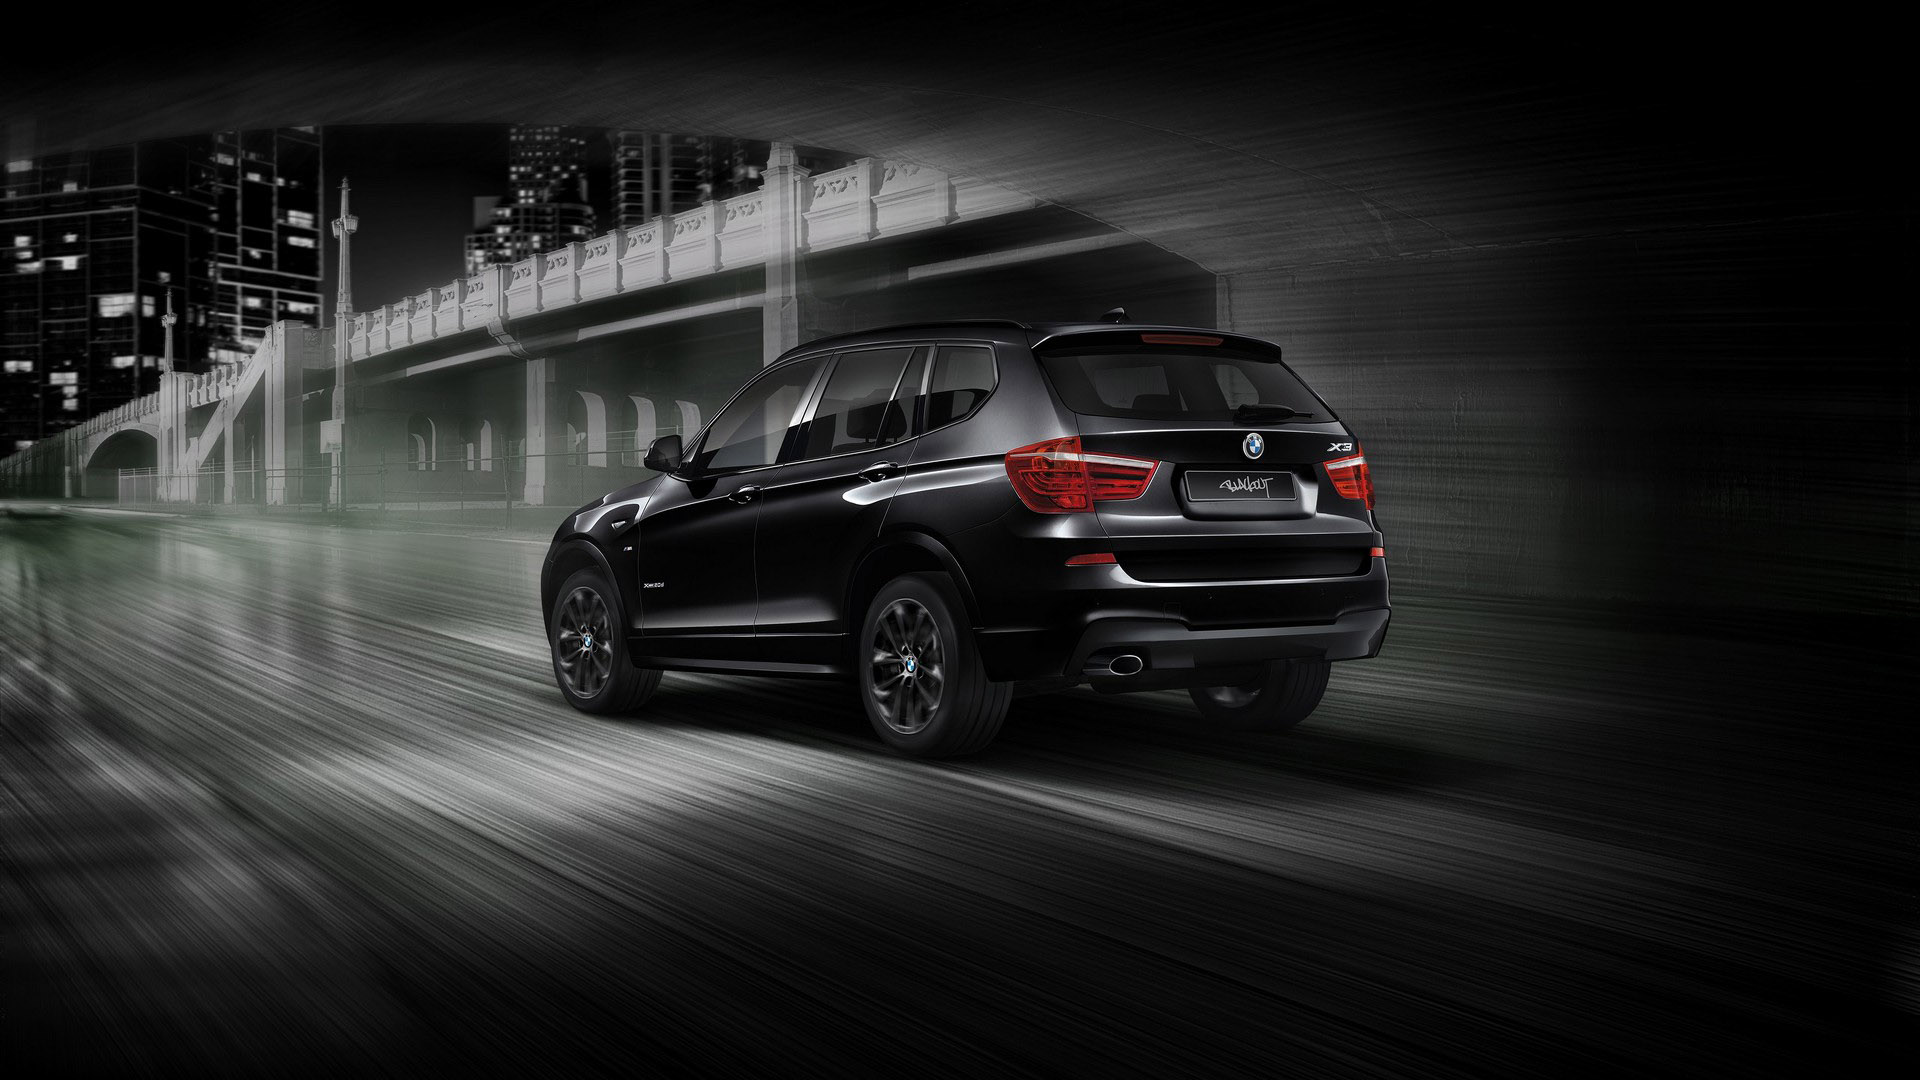 BMW Introduces X3 Blackout Edition in Japan